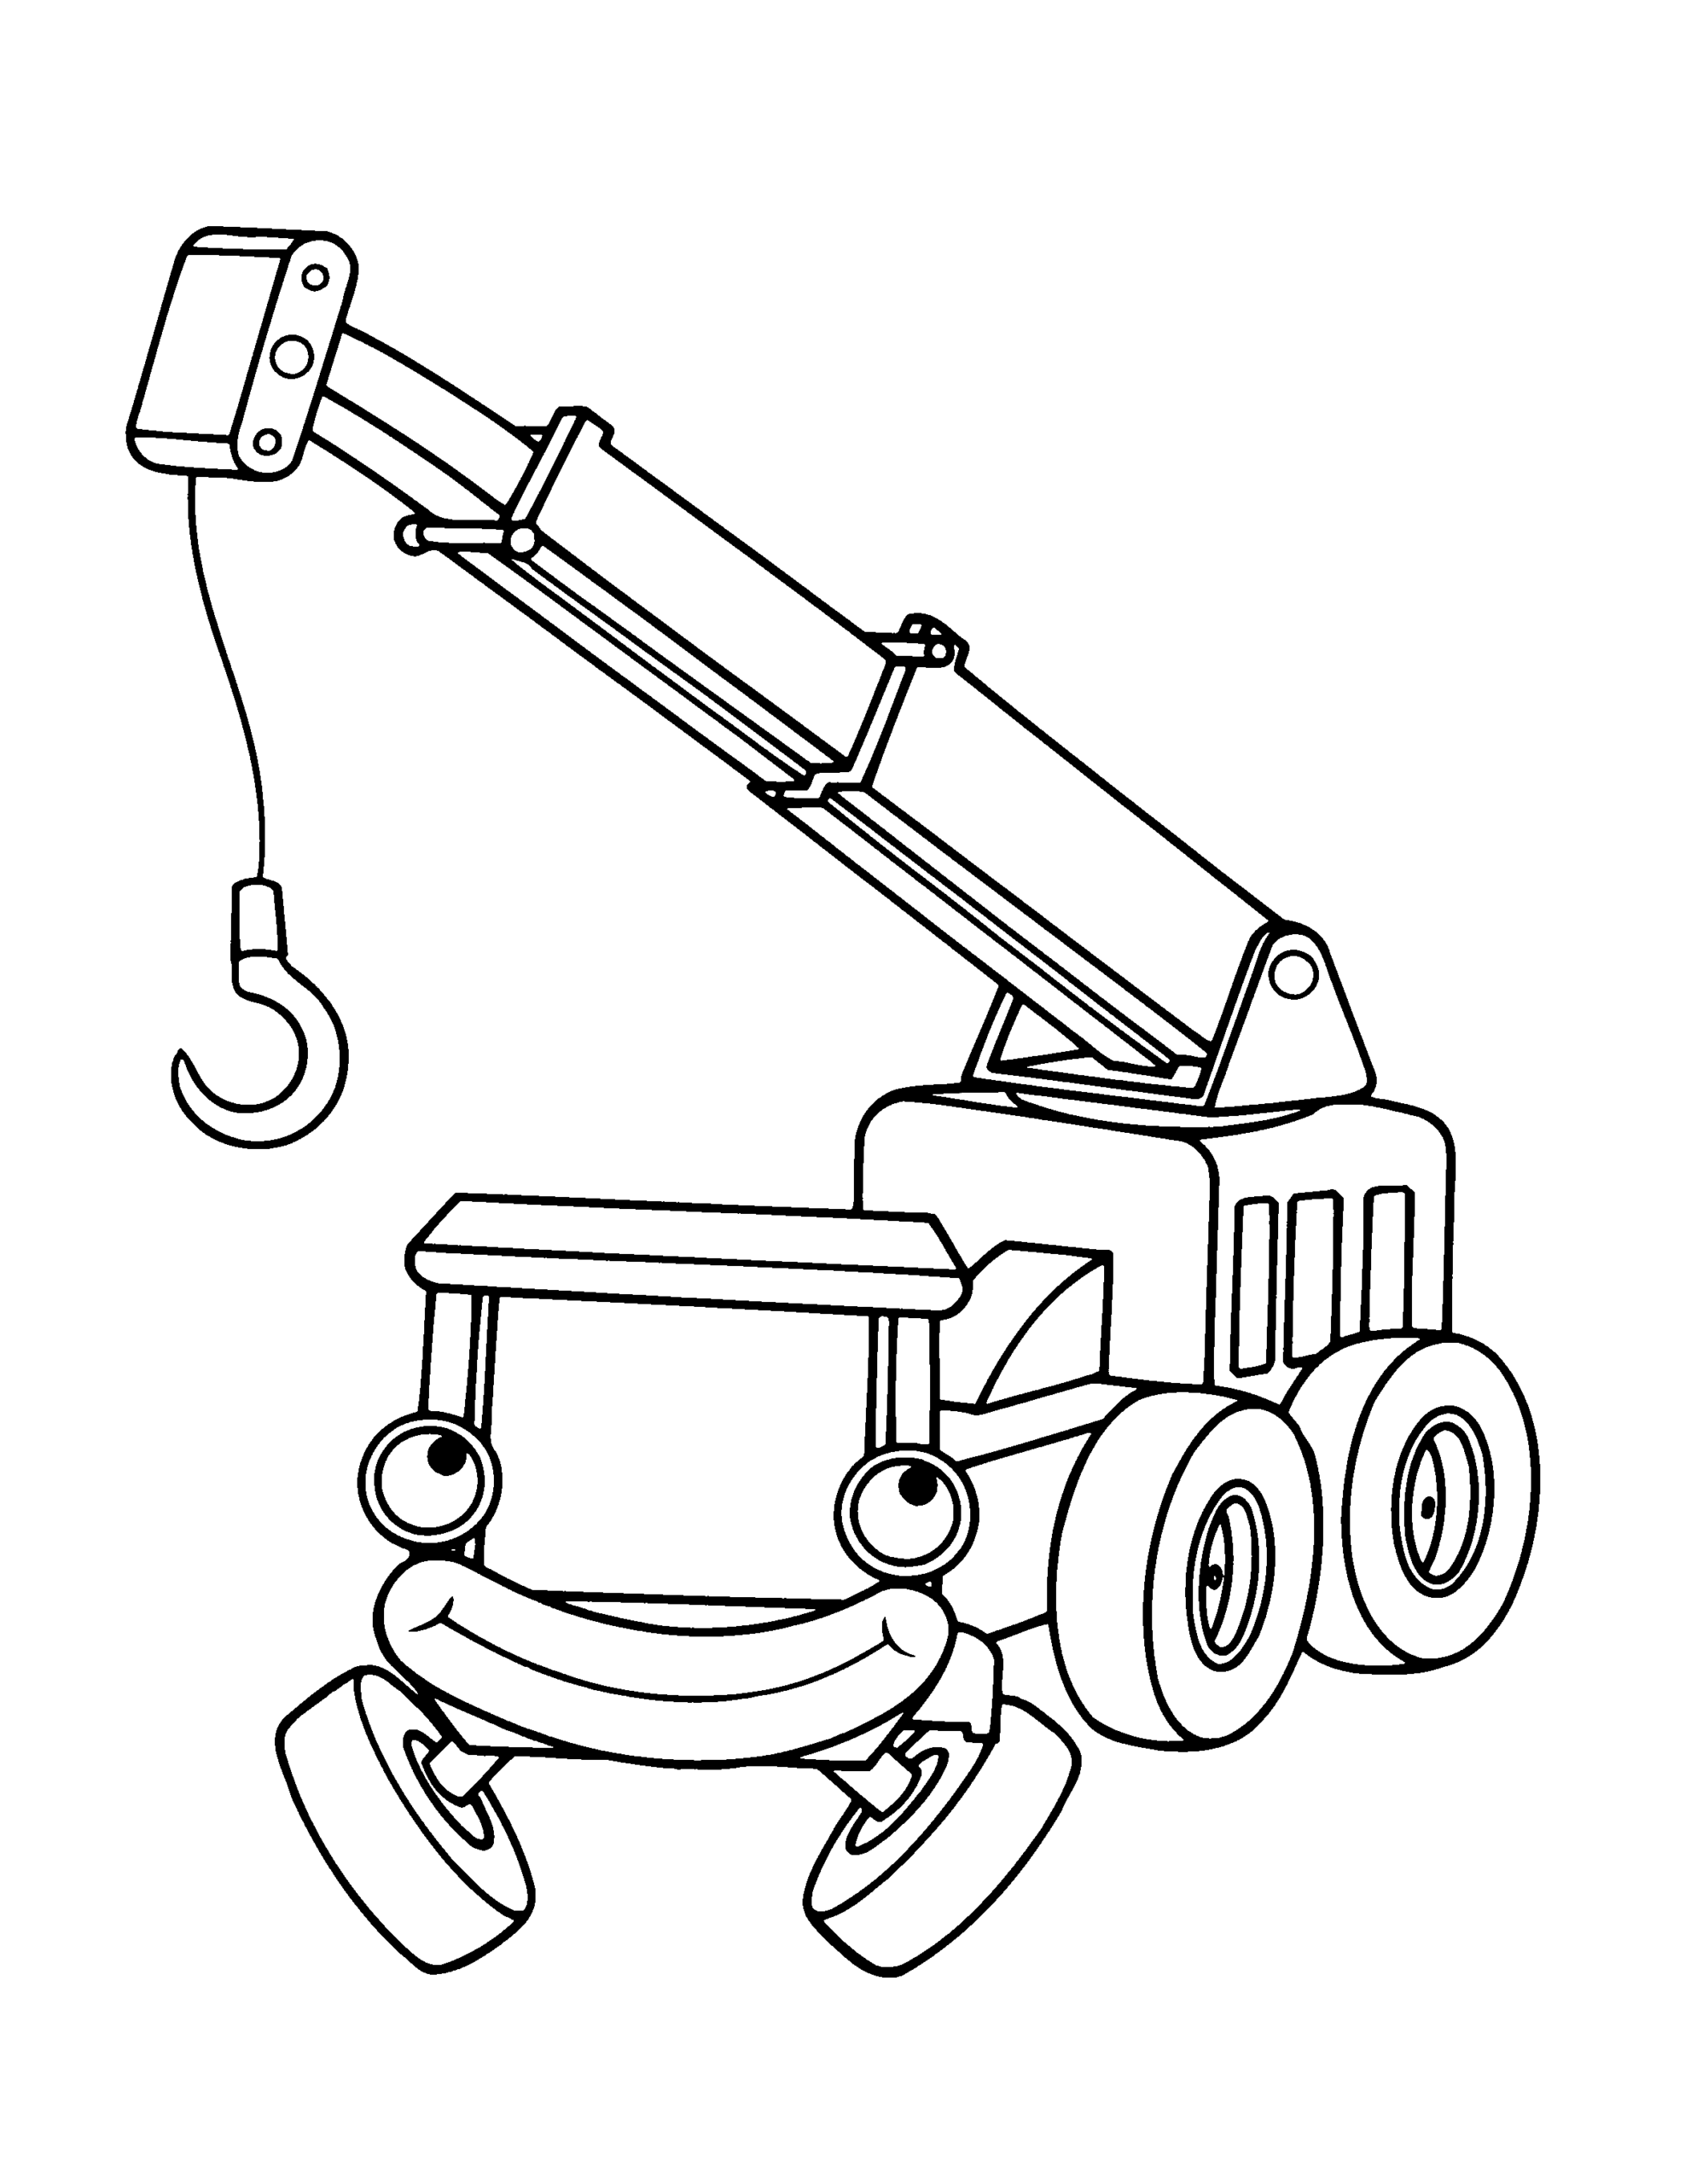 Bob the Builder Coloring Pages TV Film bob der baumeister Printable 2020 00943 Coloring4free